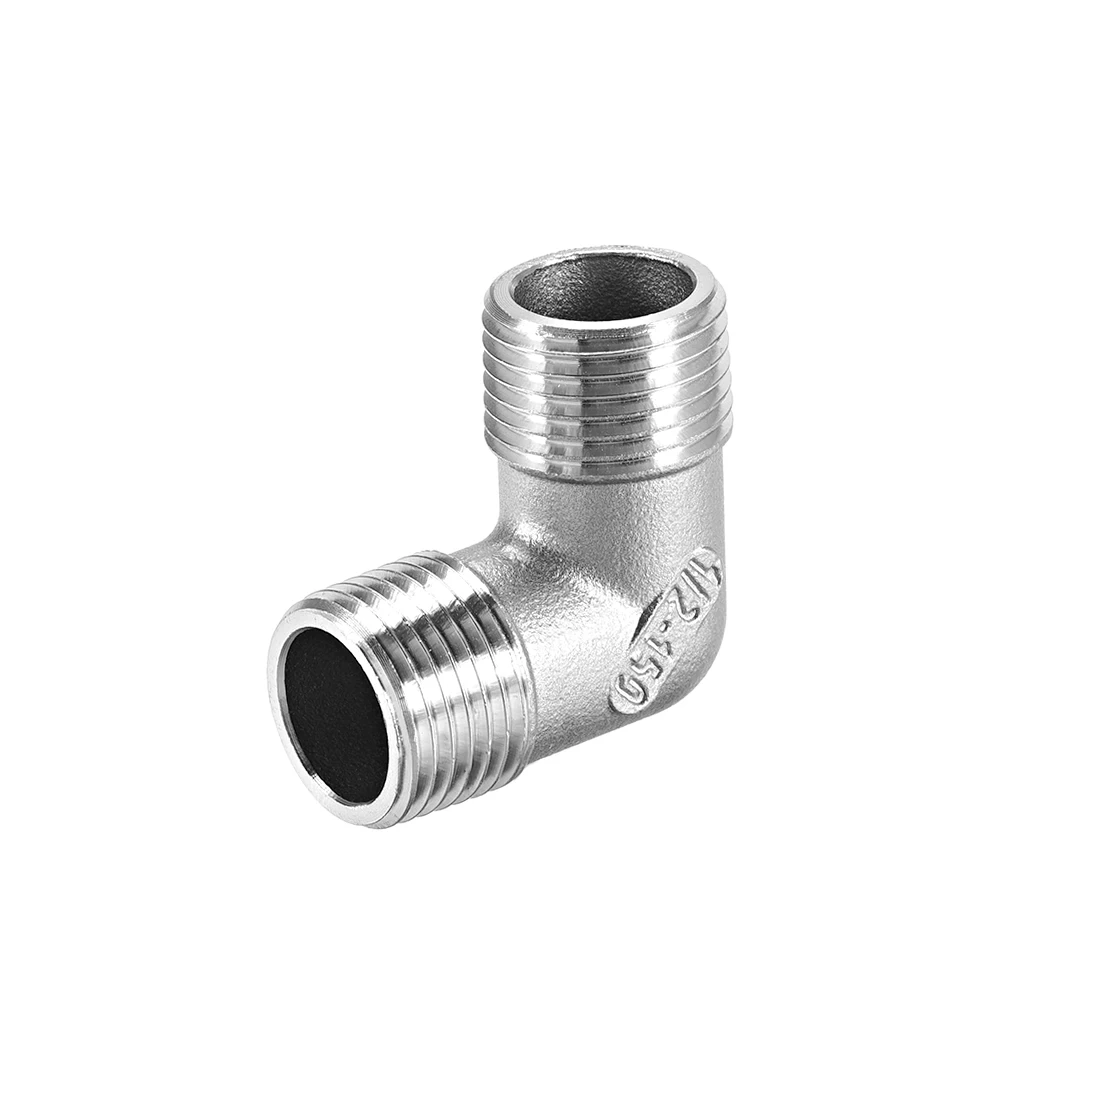 

uxcell Stainless Steel 304 Cast Pipe Fitting 90 Degree Elbow 1/2 BSPT Male x 1/2 BSPT Male Thread for air, water, fuel, oil